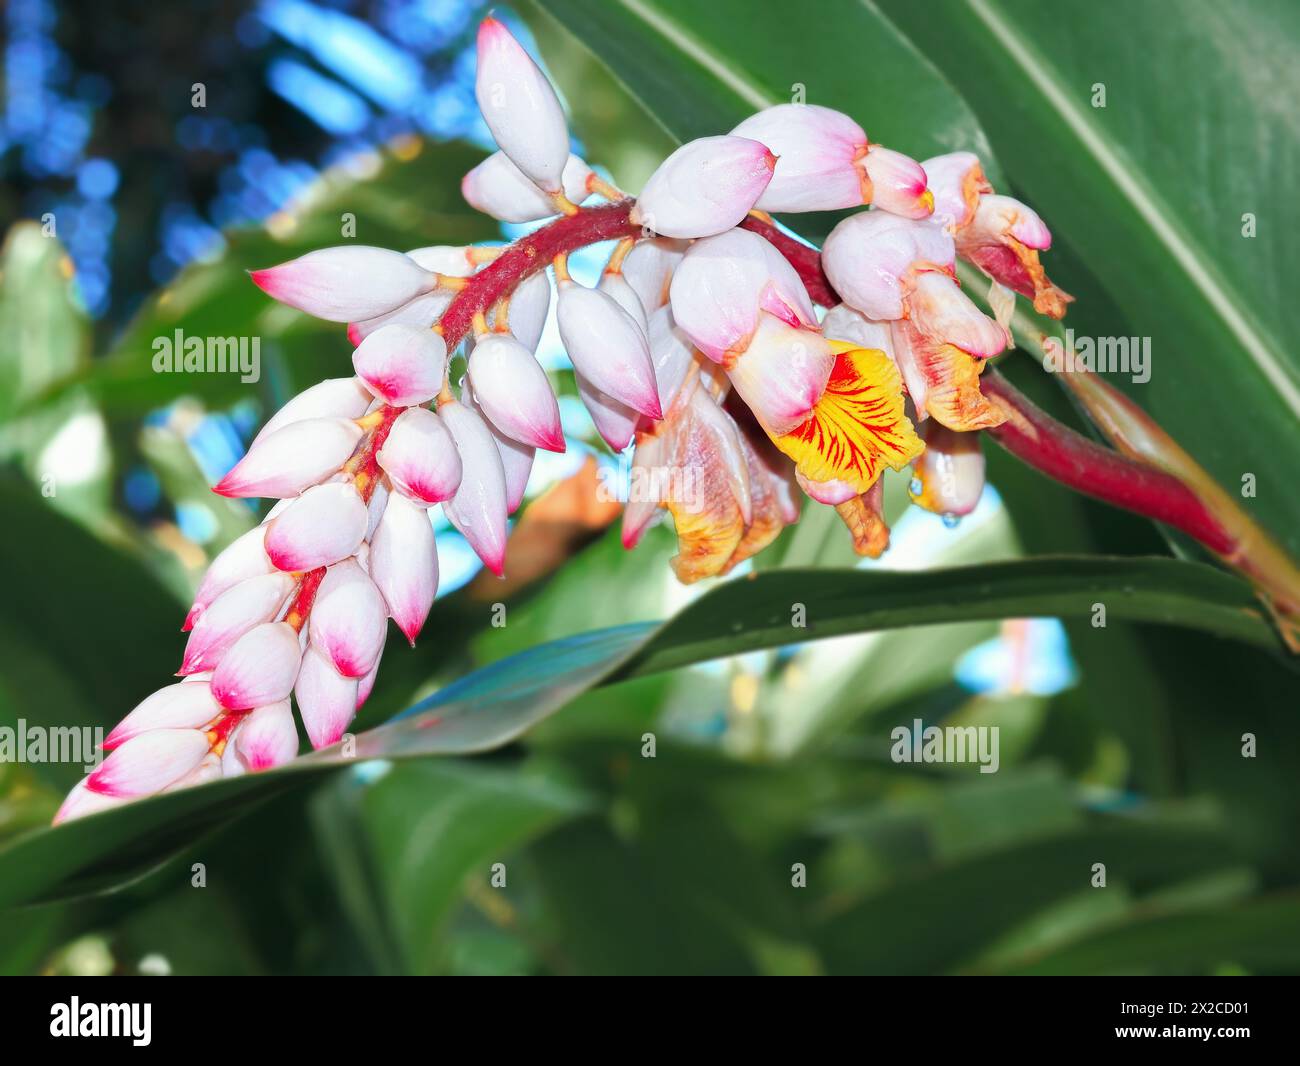 Flower panicle with an open partial flower of an Alpinia zerumbet from the ginger family (Zingiberaceae), close-up with a soft background Stock Photo